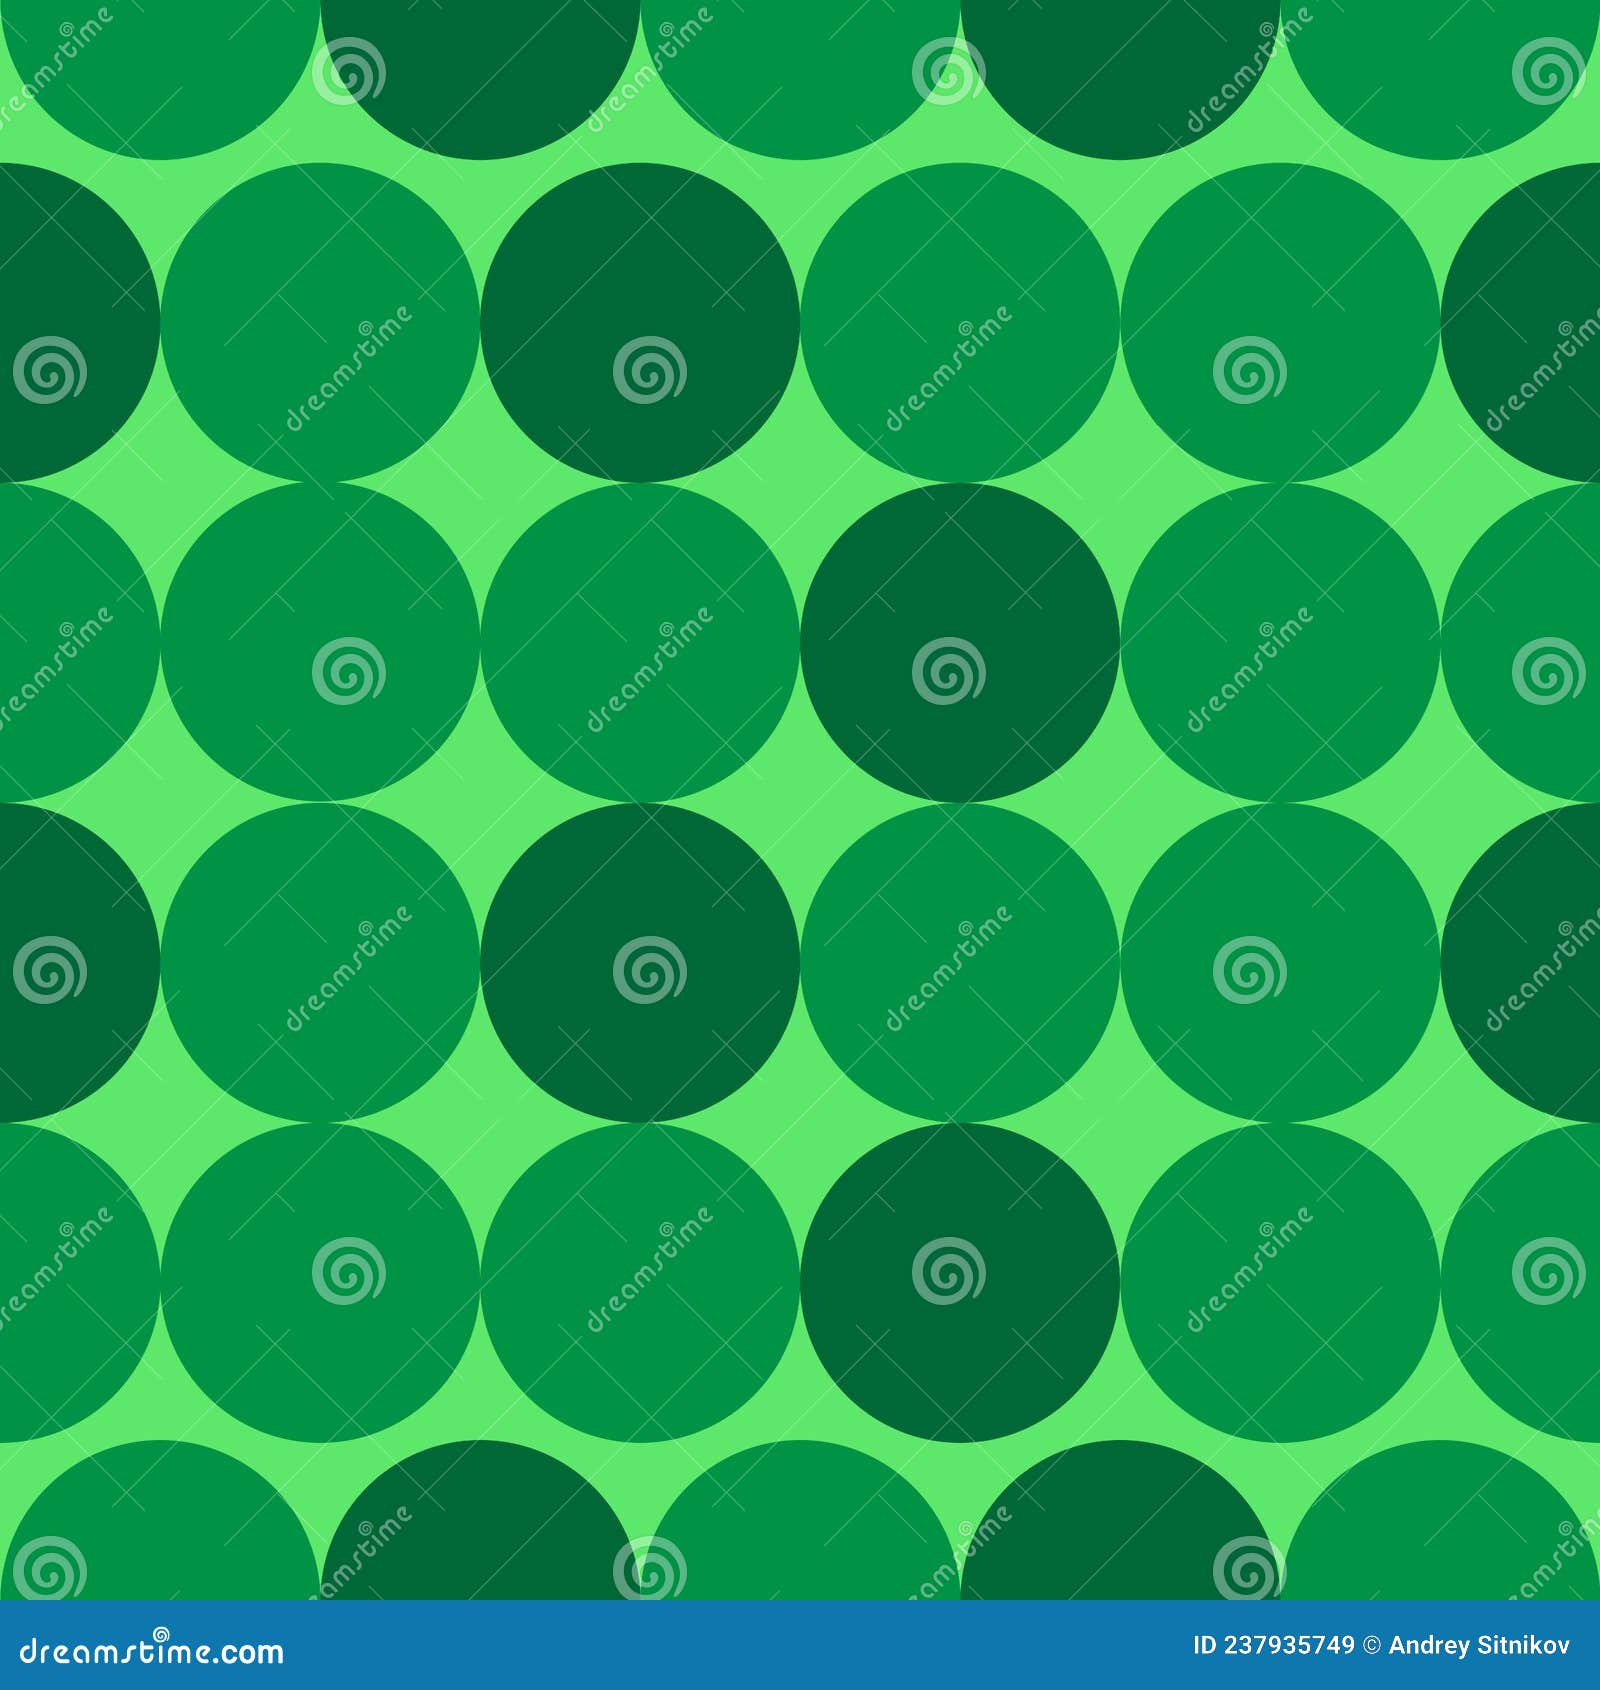 Seamless Green Background Consisting of Circles Stock Vector ...